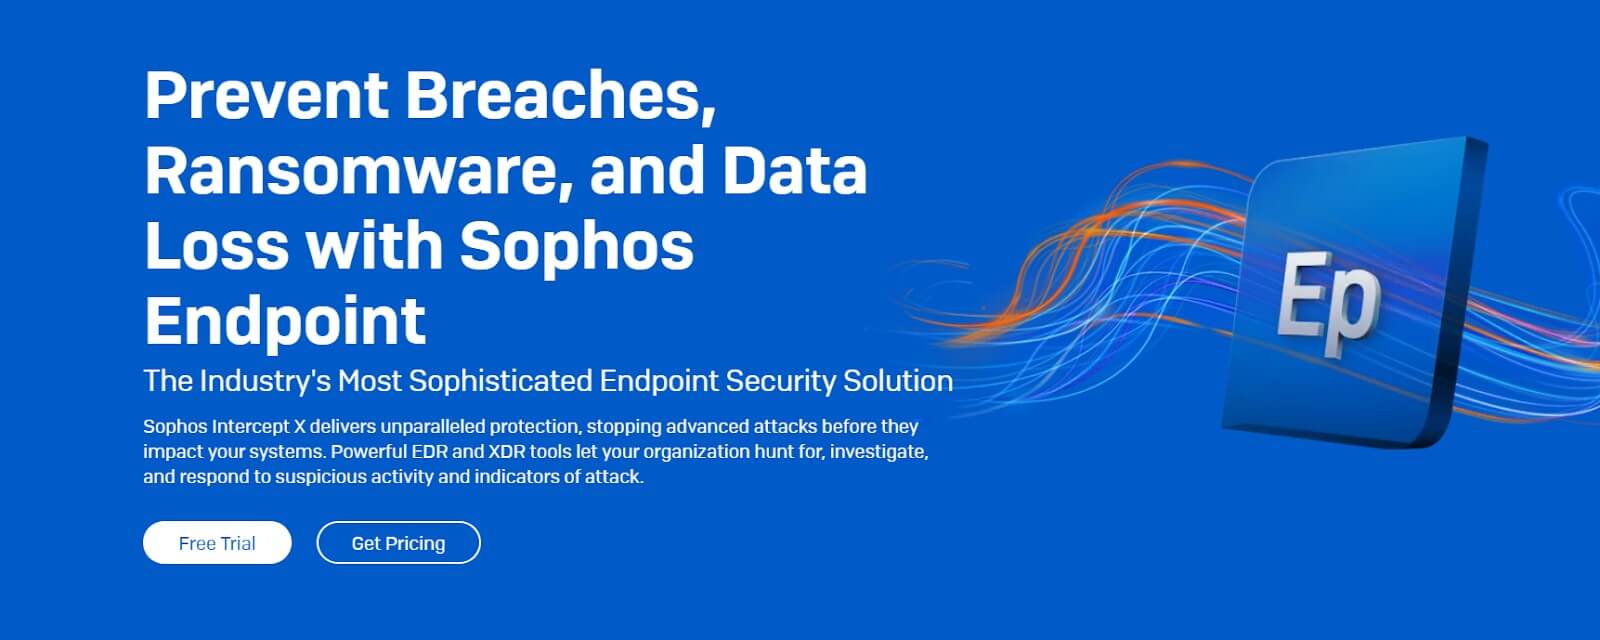 Sophos Endpoint protection ad showcasing blue and orange design elements with text promoting breach, ransomware, and data loss prevention through advanced security solutions.